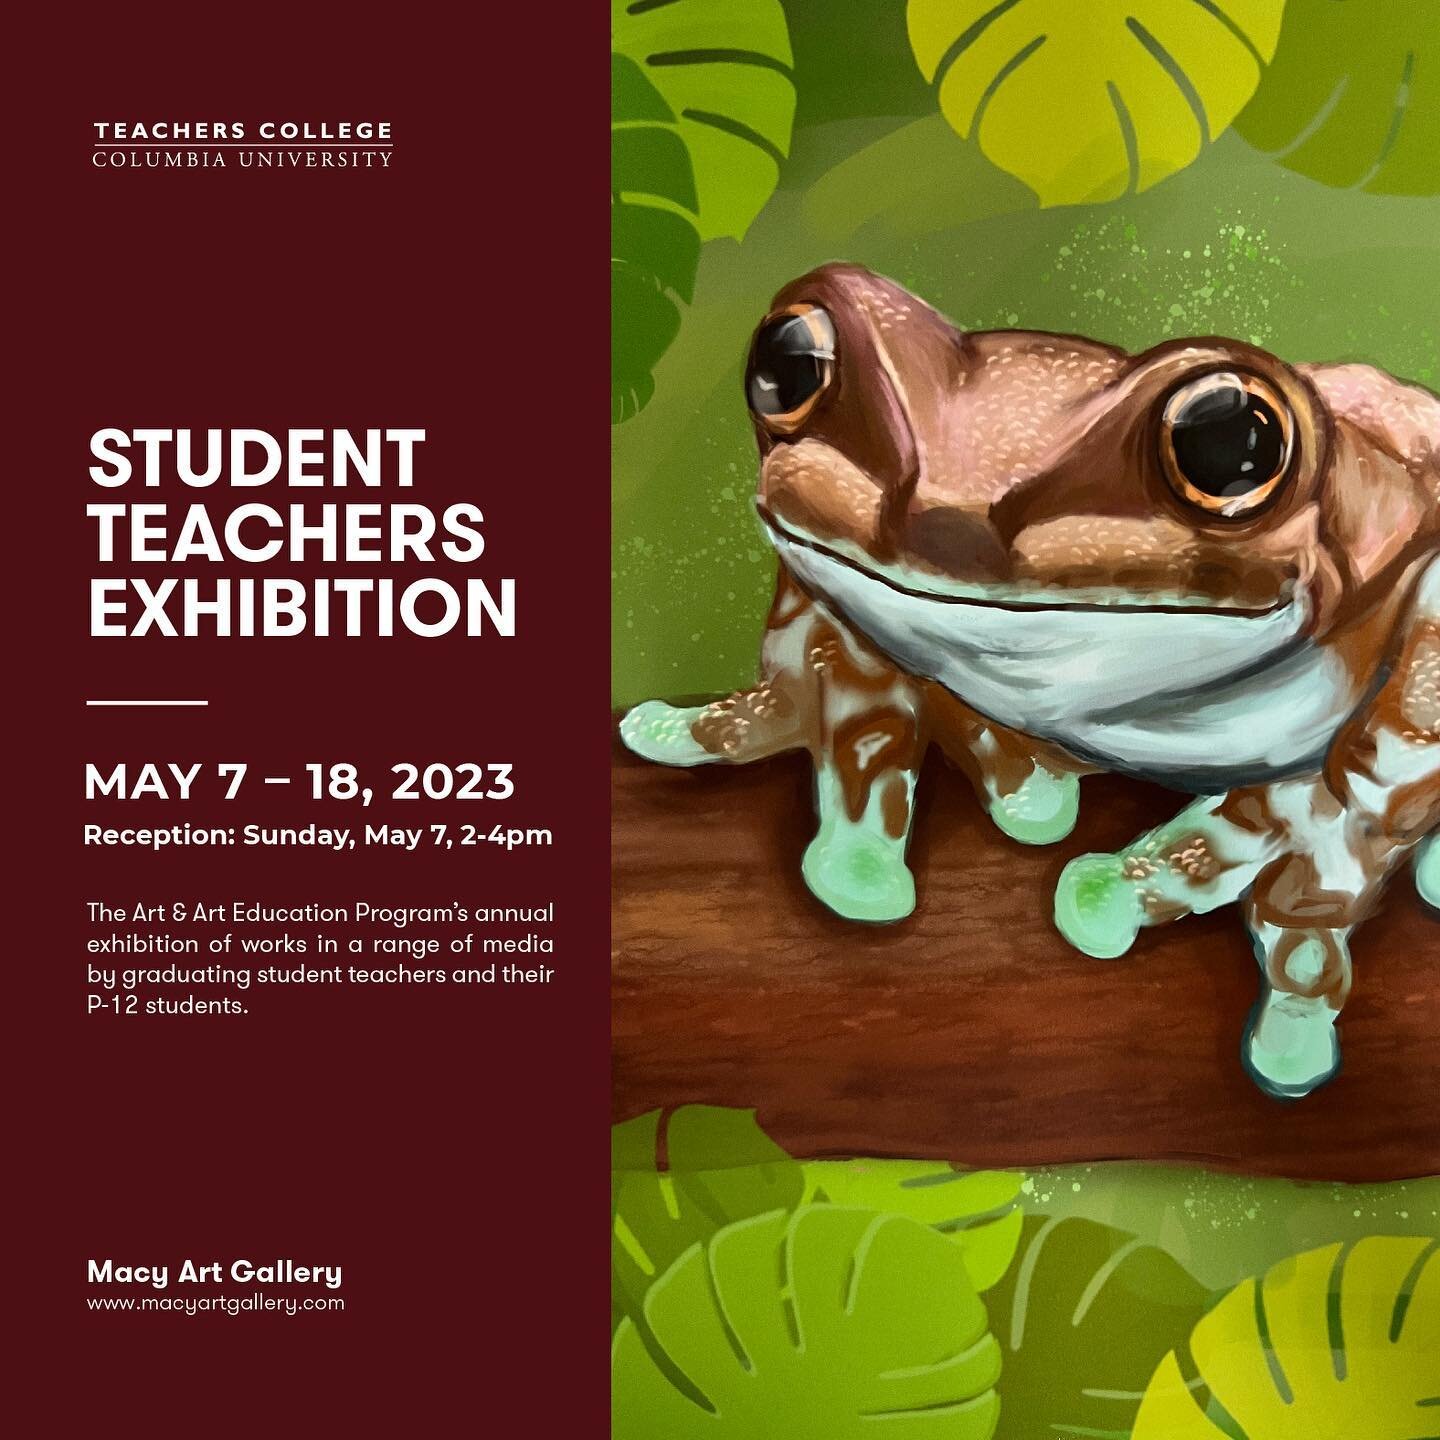 Student Teachers Exhibition 2023
Macy Art Gallery
Teachers College Columbia University
525 W 120th St, New York, NY 10027

Our cohort of six is a part of TC Art &amp; Art Education&rsquo;s Initial Certification New York State program. As our magnum o